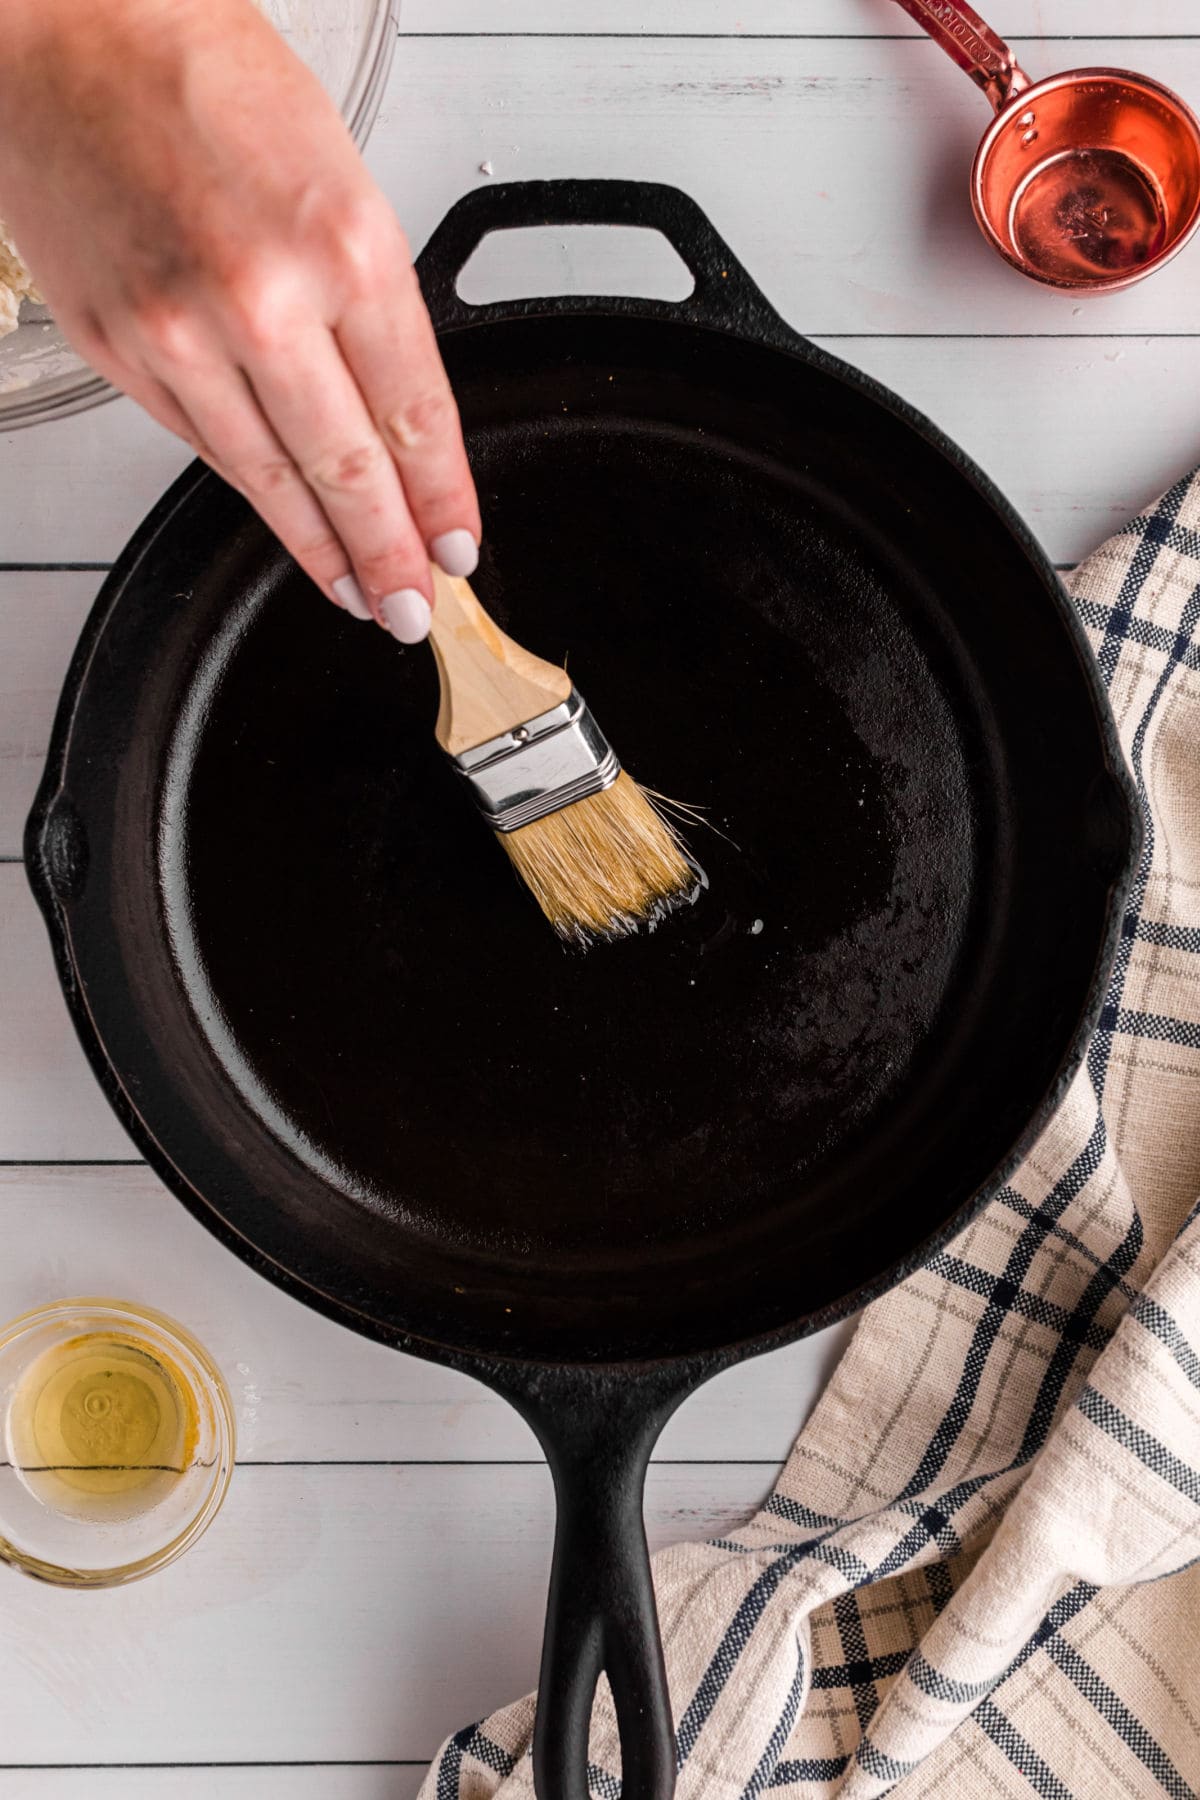 Some one seasoning an iron skillet with oil